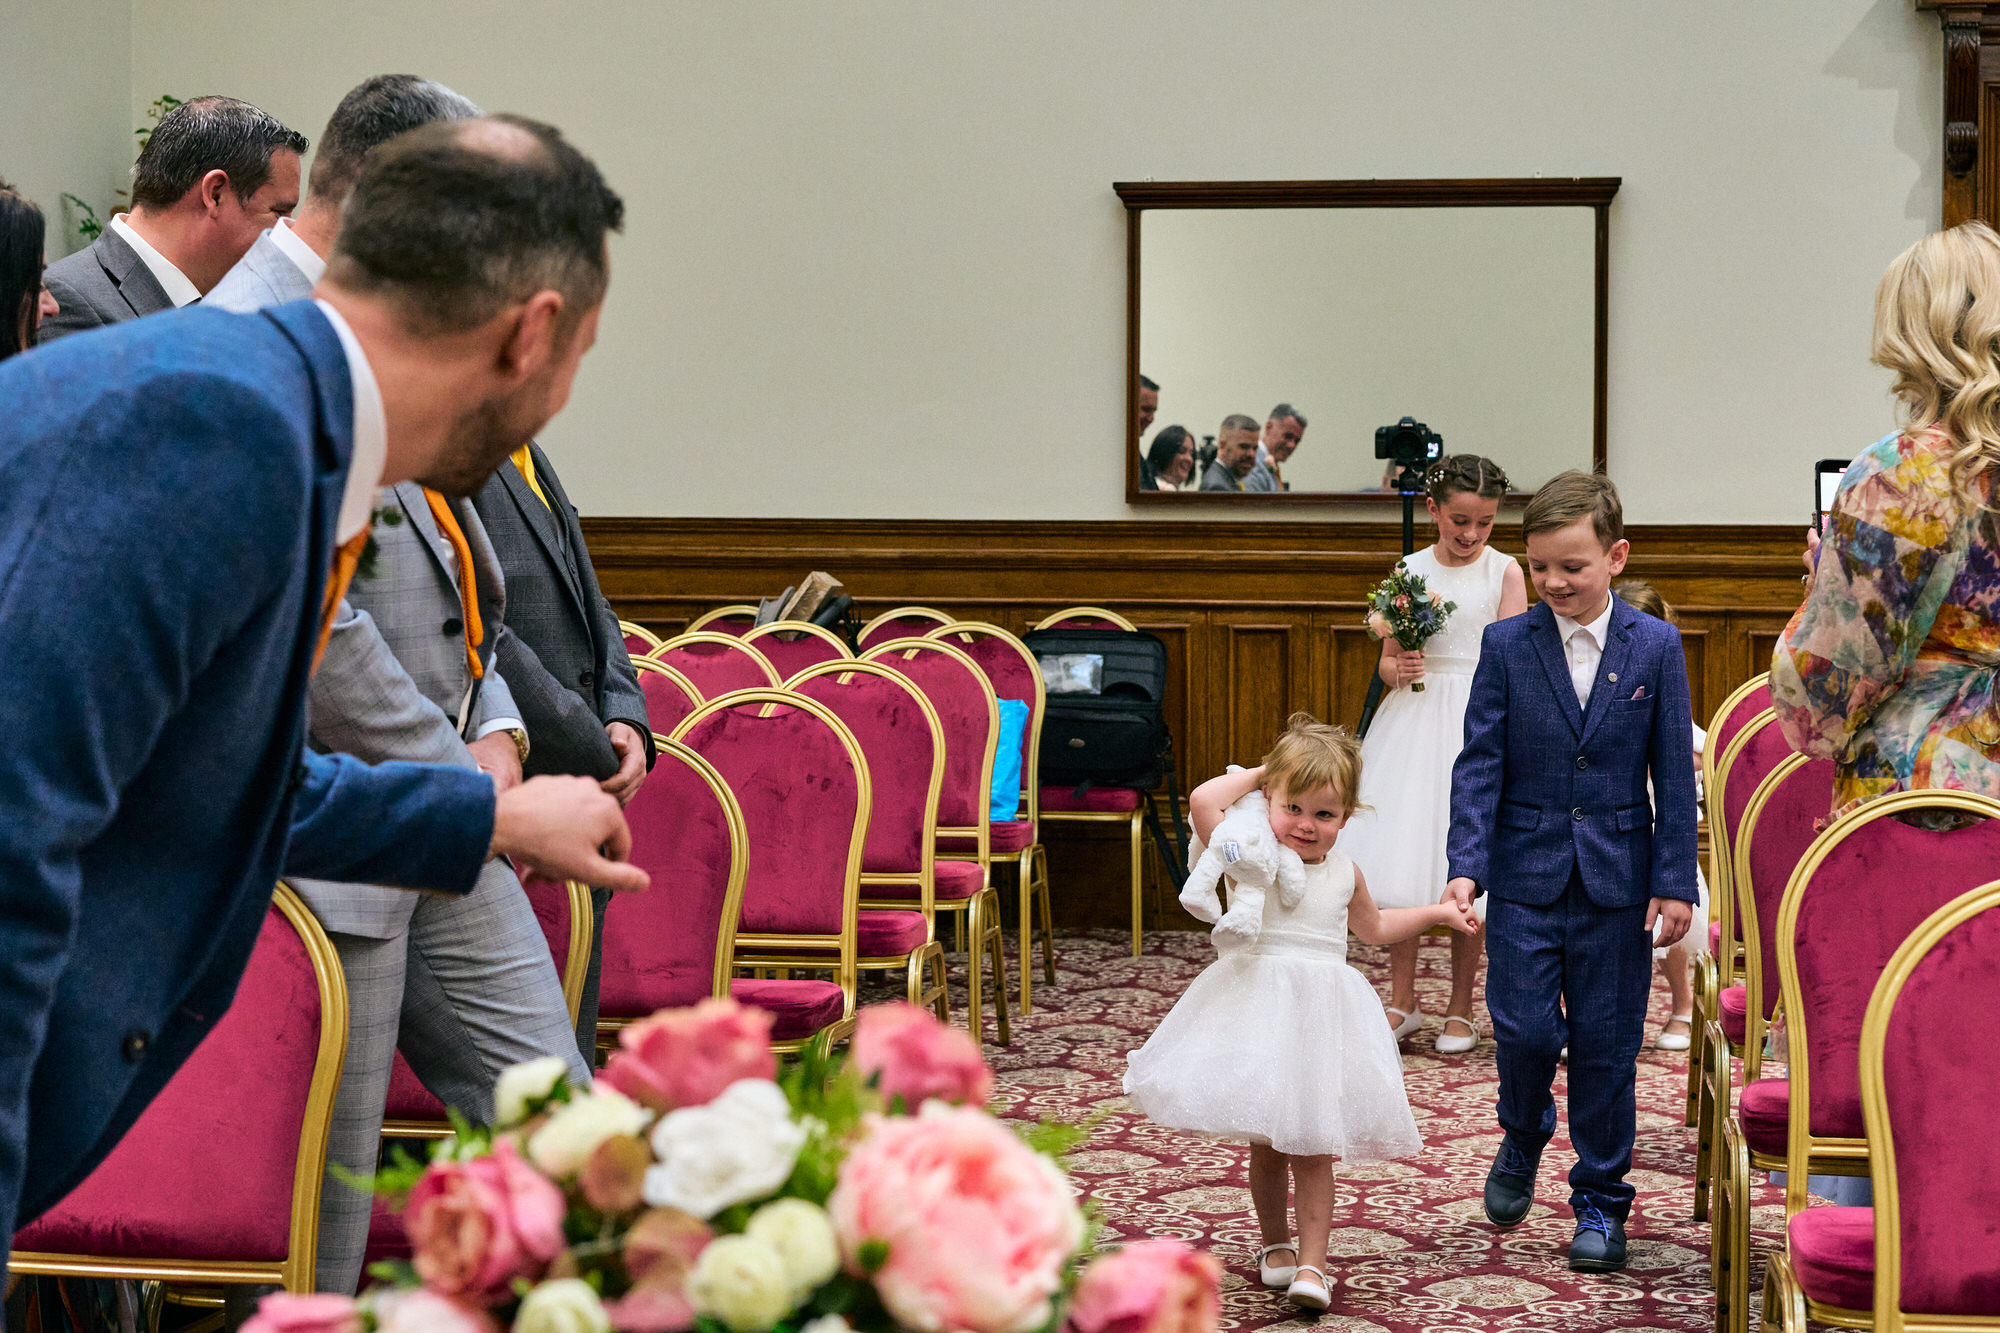 the groom leans down to welcome the flower girl down the aisle